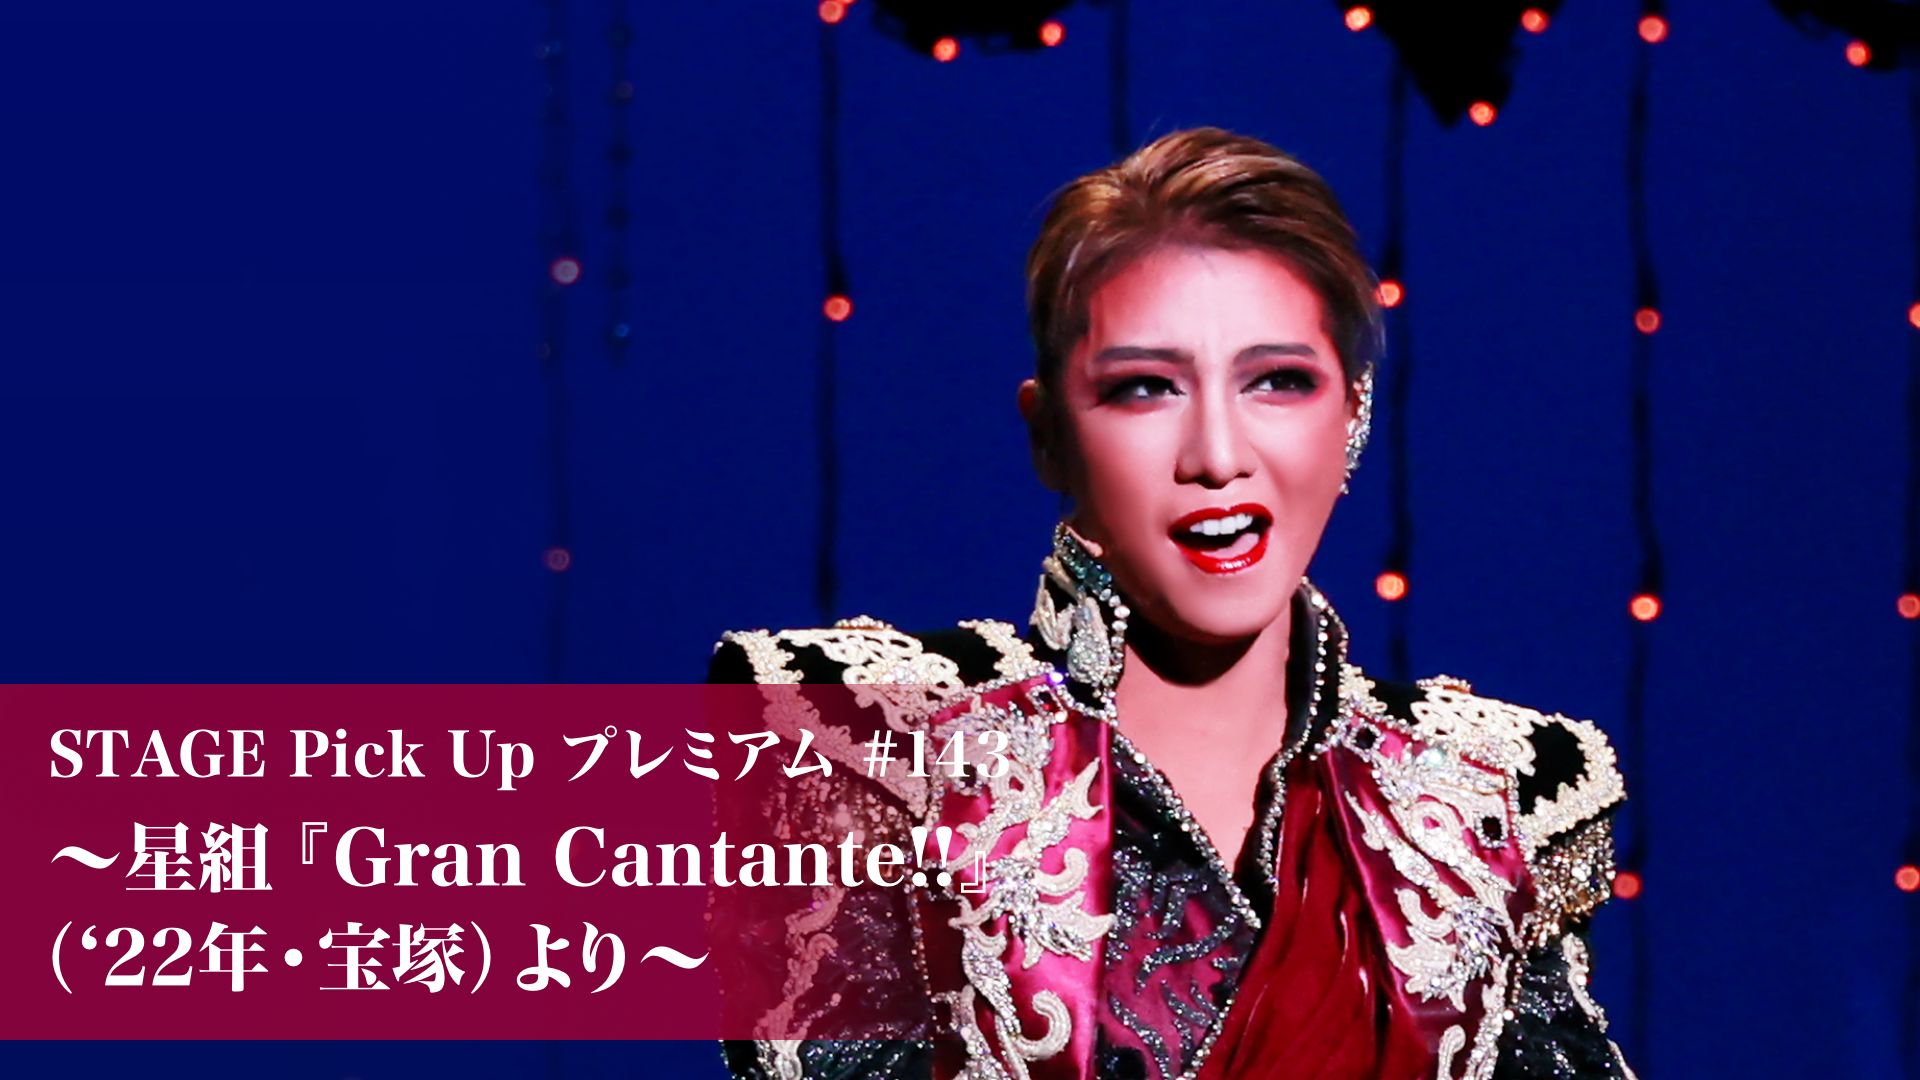 STAGE Pick Up プレミアム#143〜星組『Gran Cantante!!』(’22年・全国)より〜